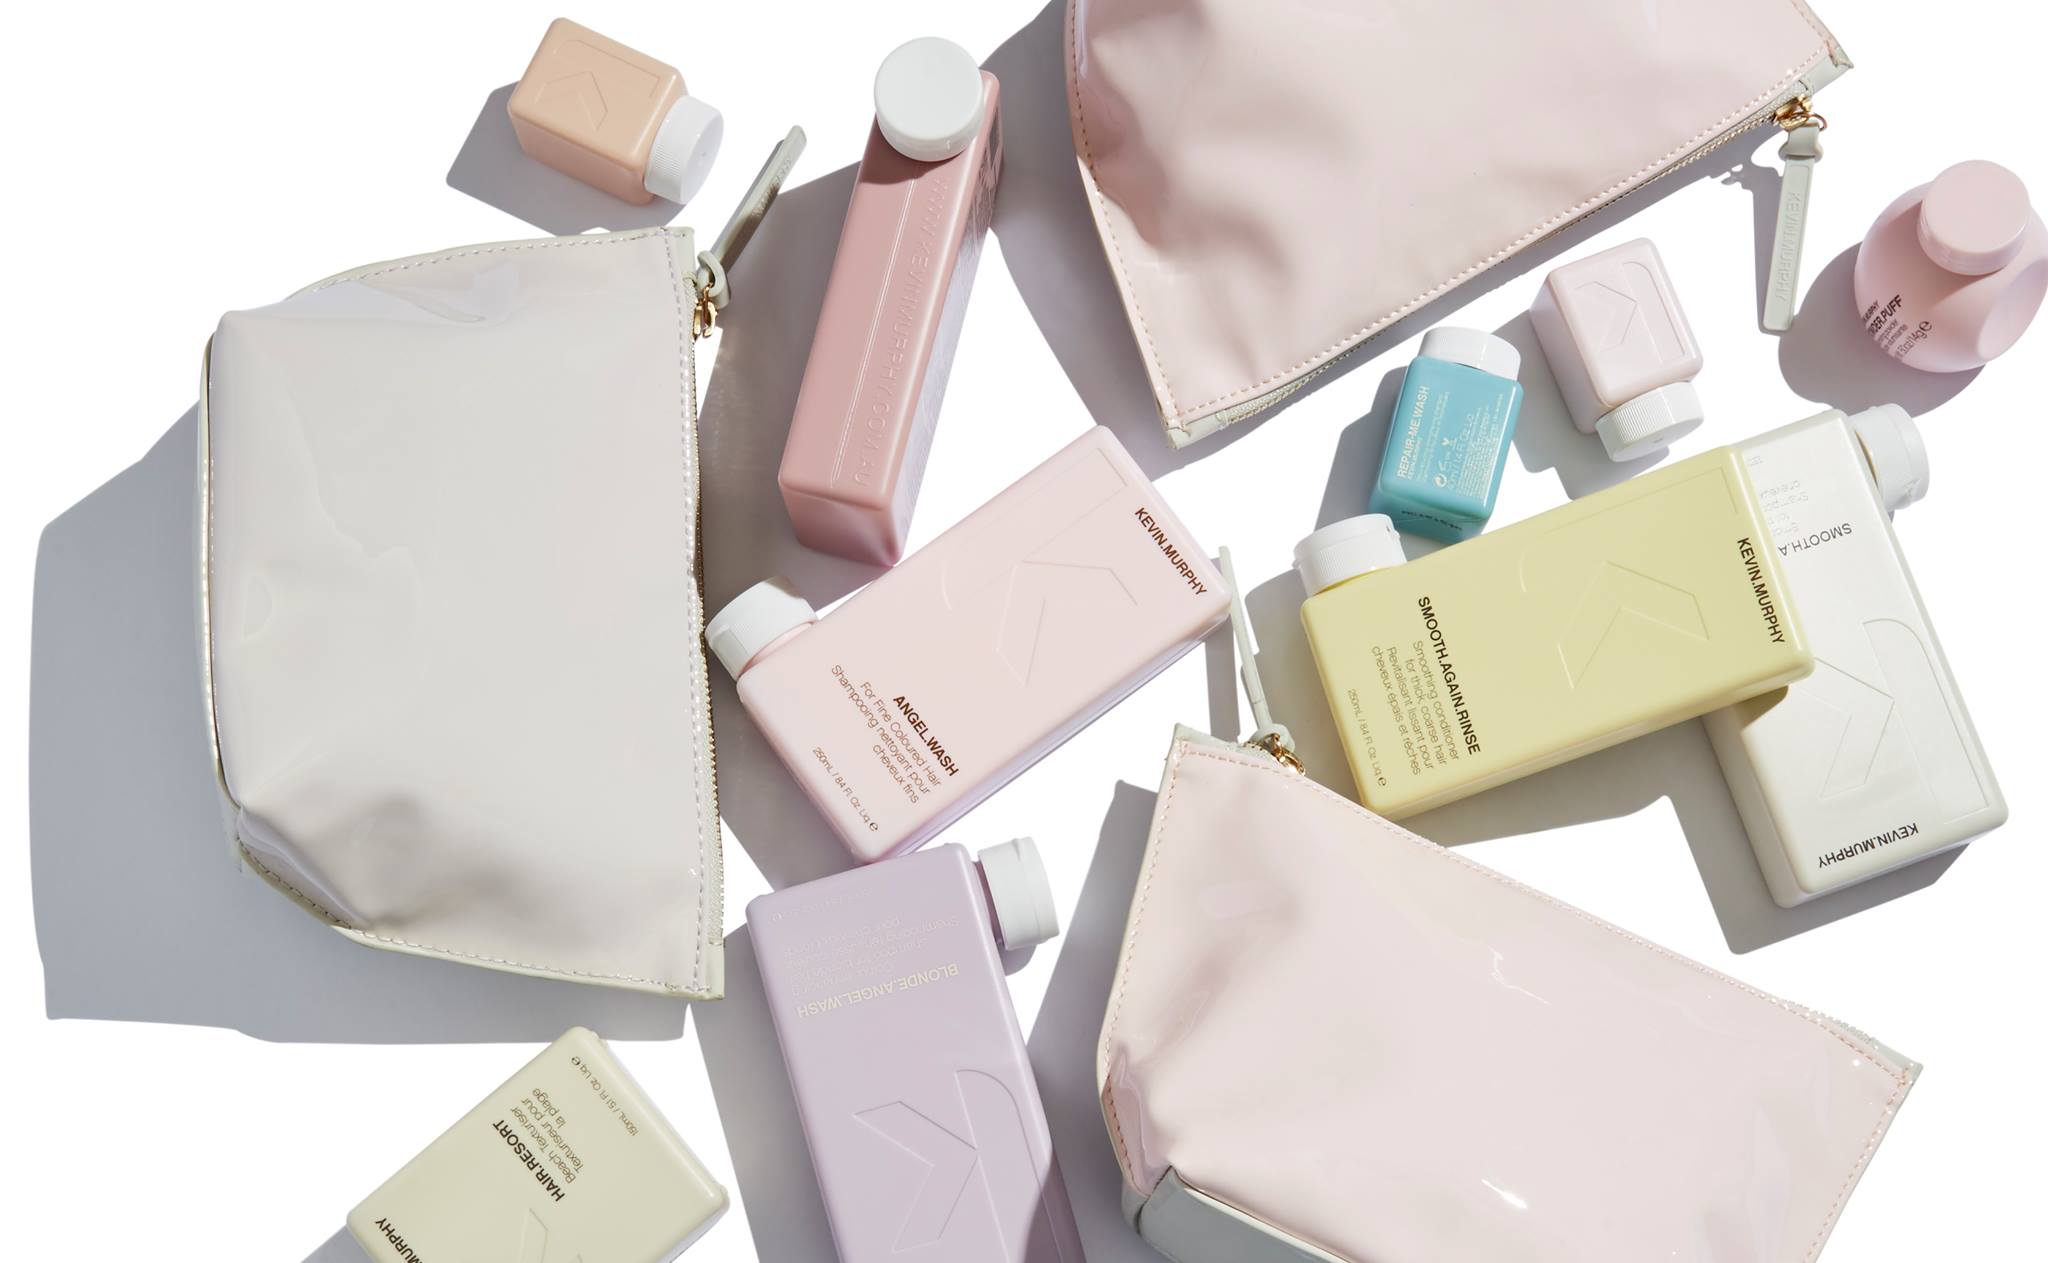 kevin-murphy-products